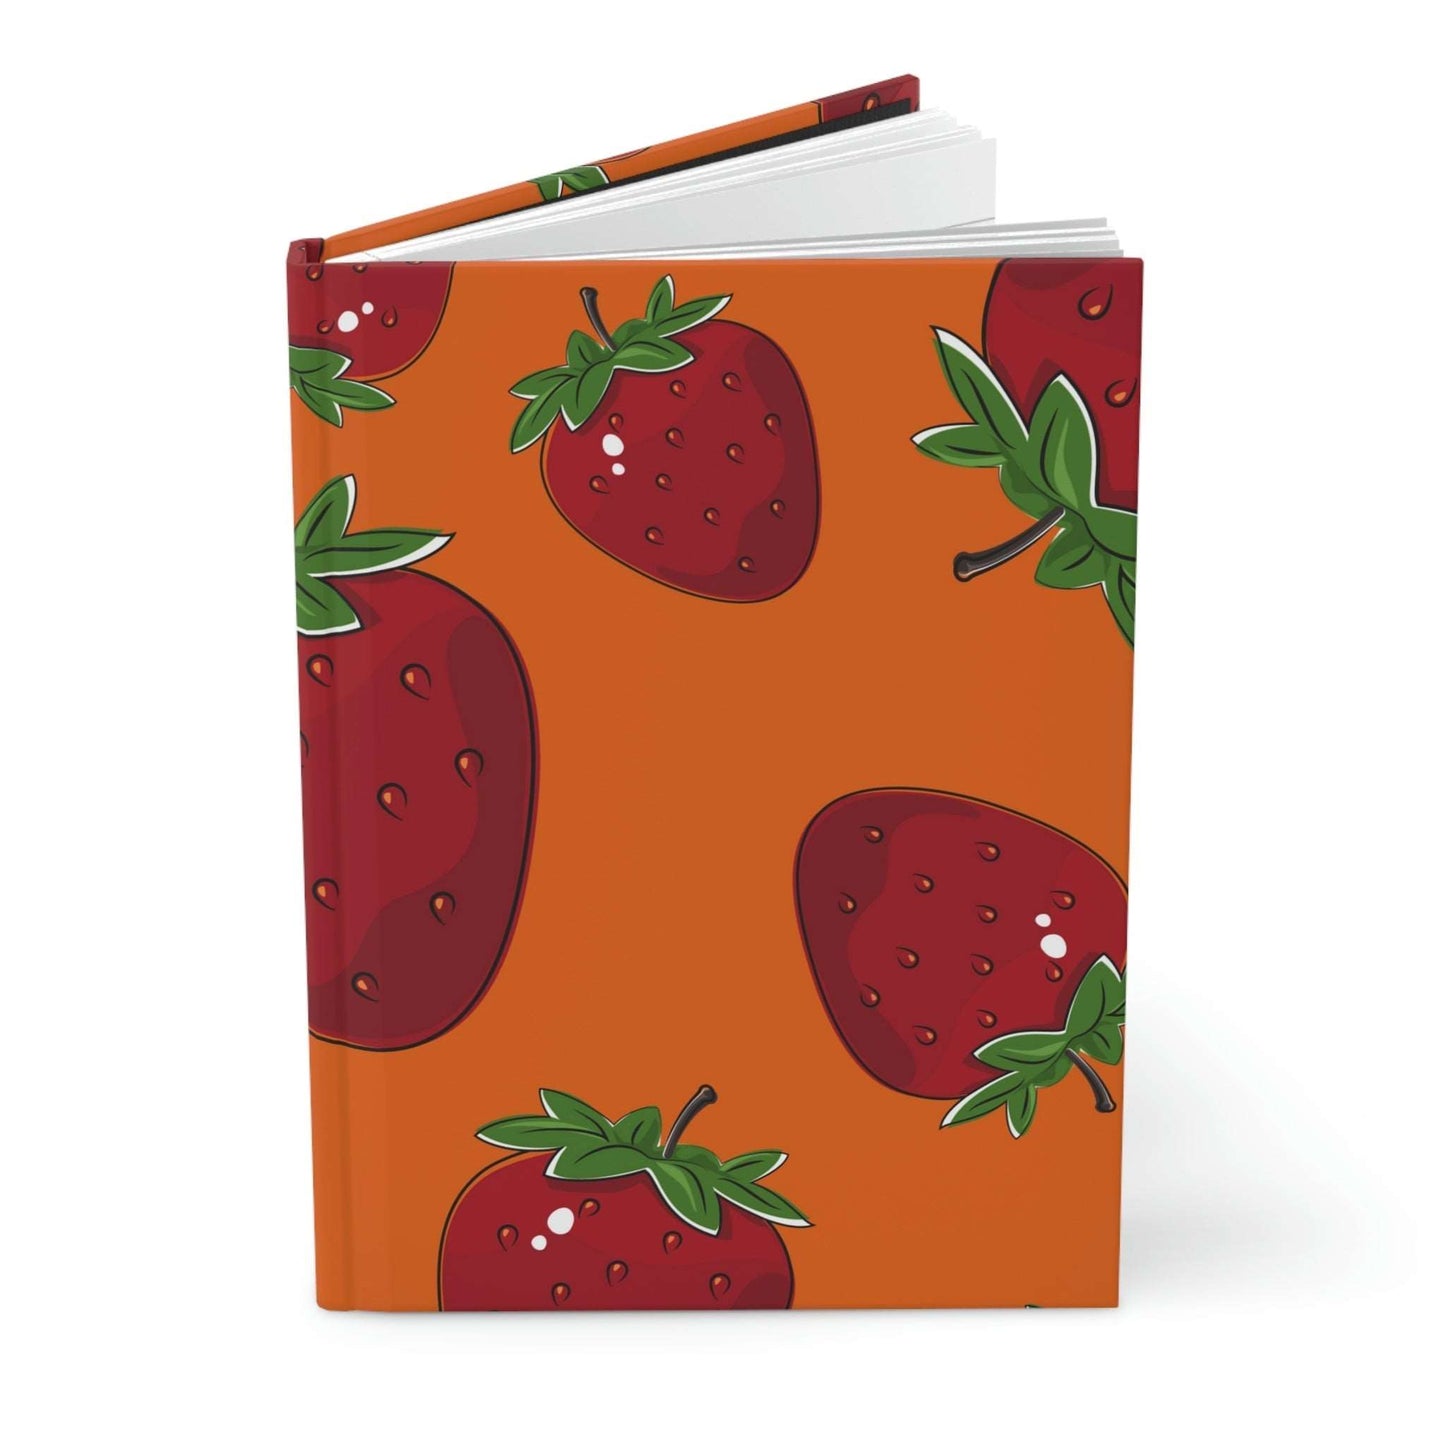 Big Juicy Strawberry Hardcover Matte Journal Paper products Pink Sweetheart